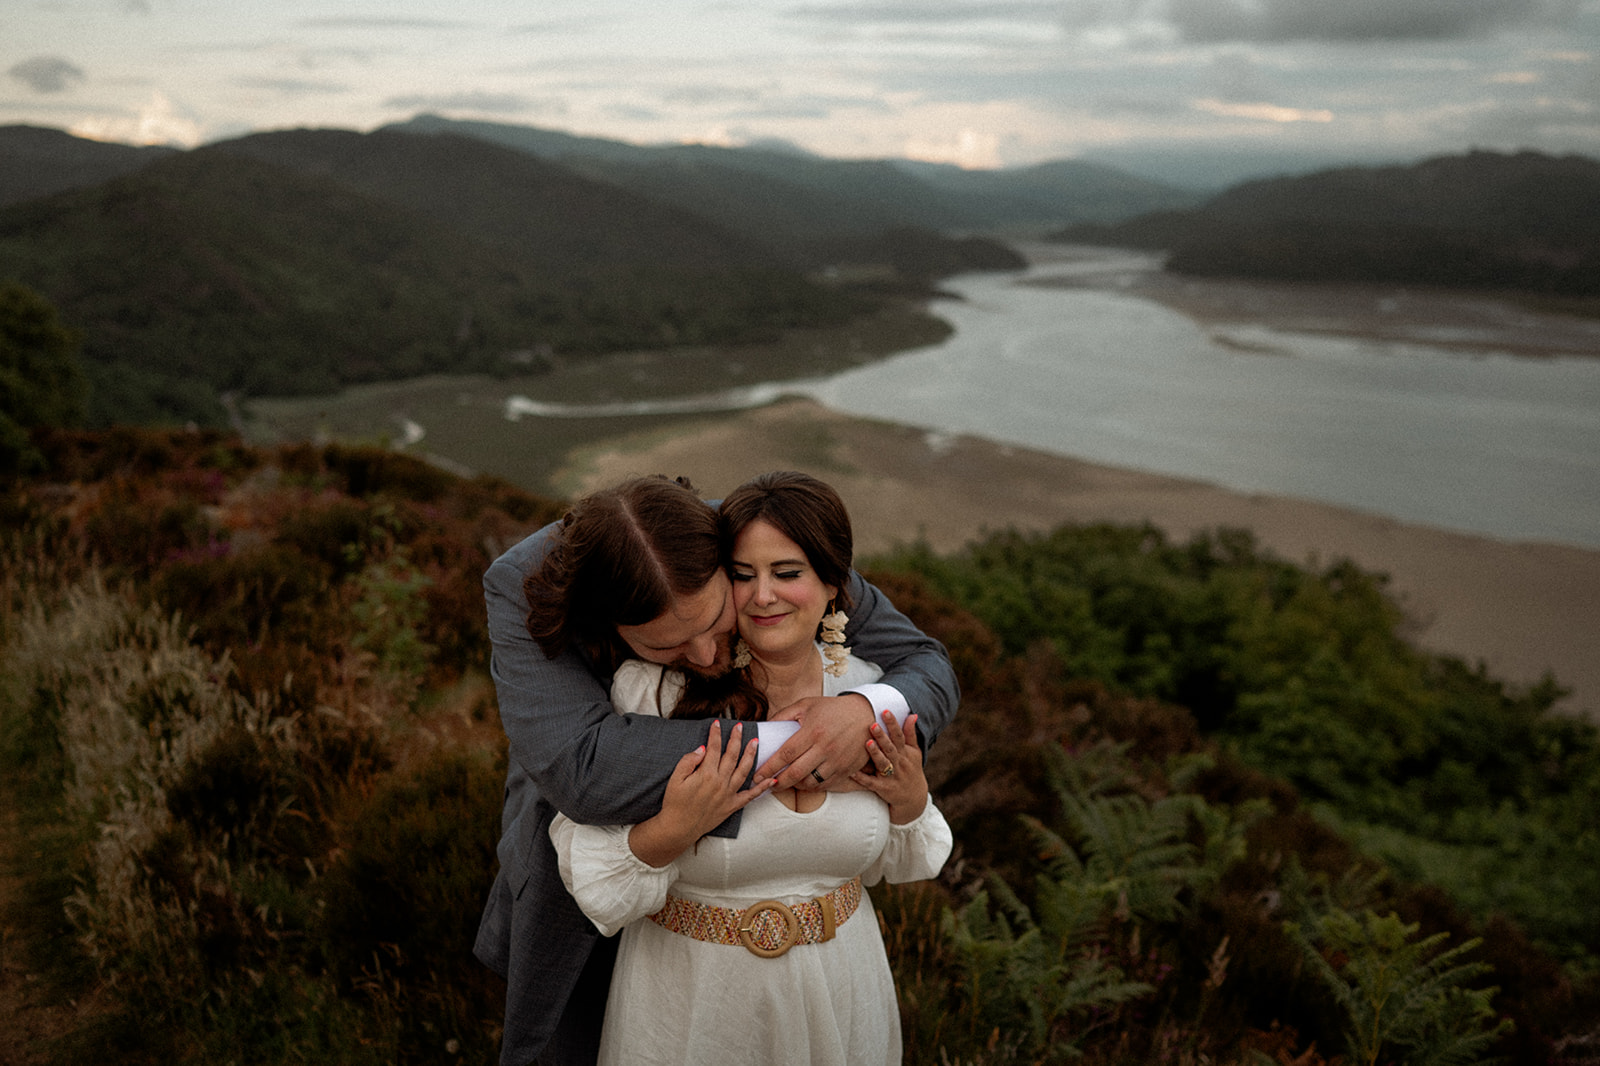 Adventure Couple Photography Session around the Mawddach Estuary at sunset